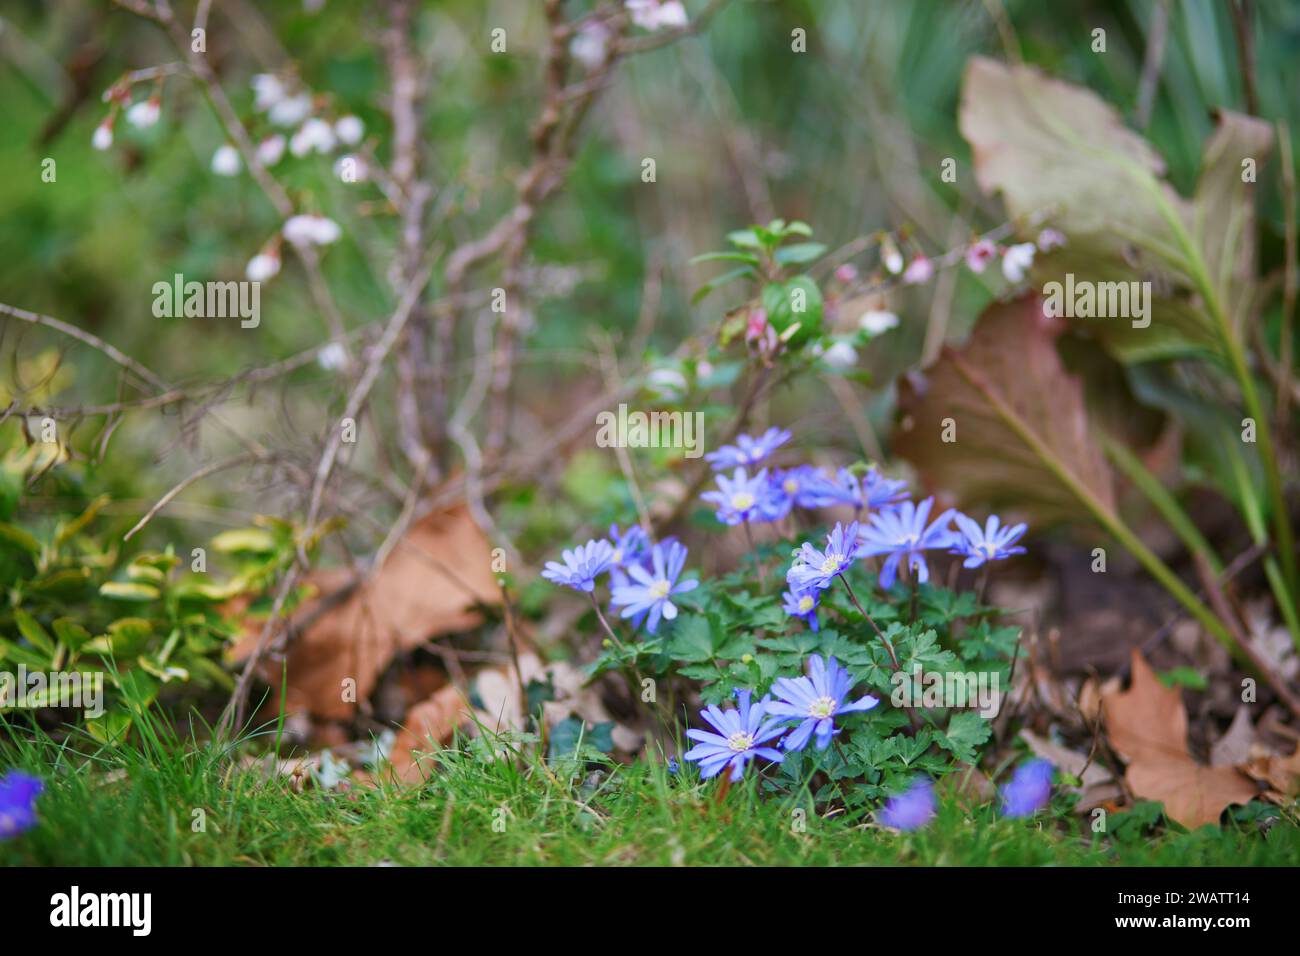 Violet forest flowers on a spring day Stock Photo